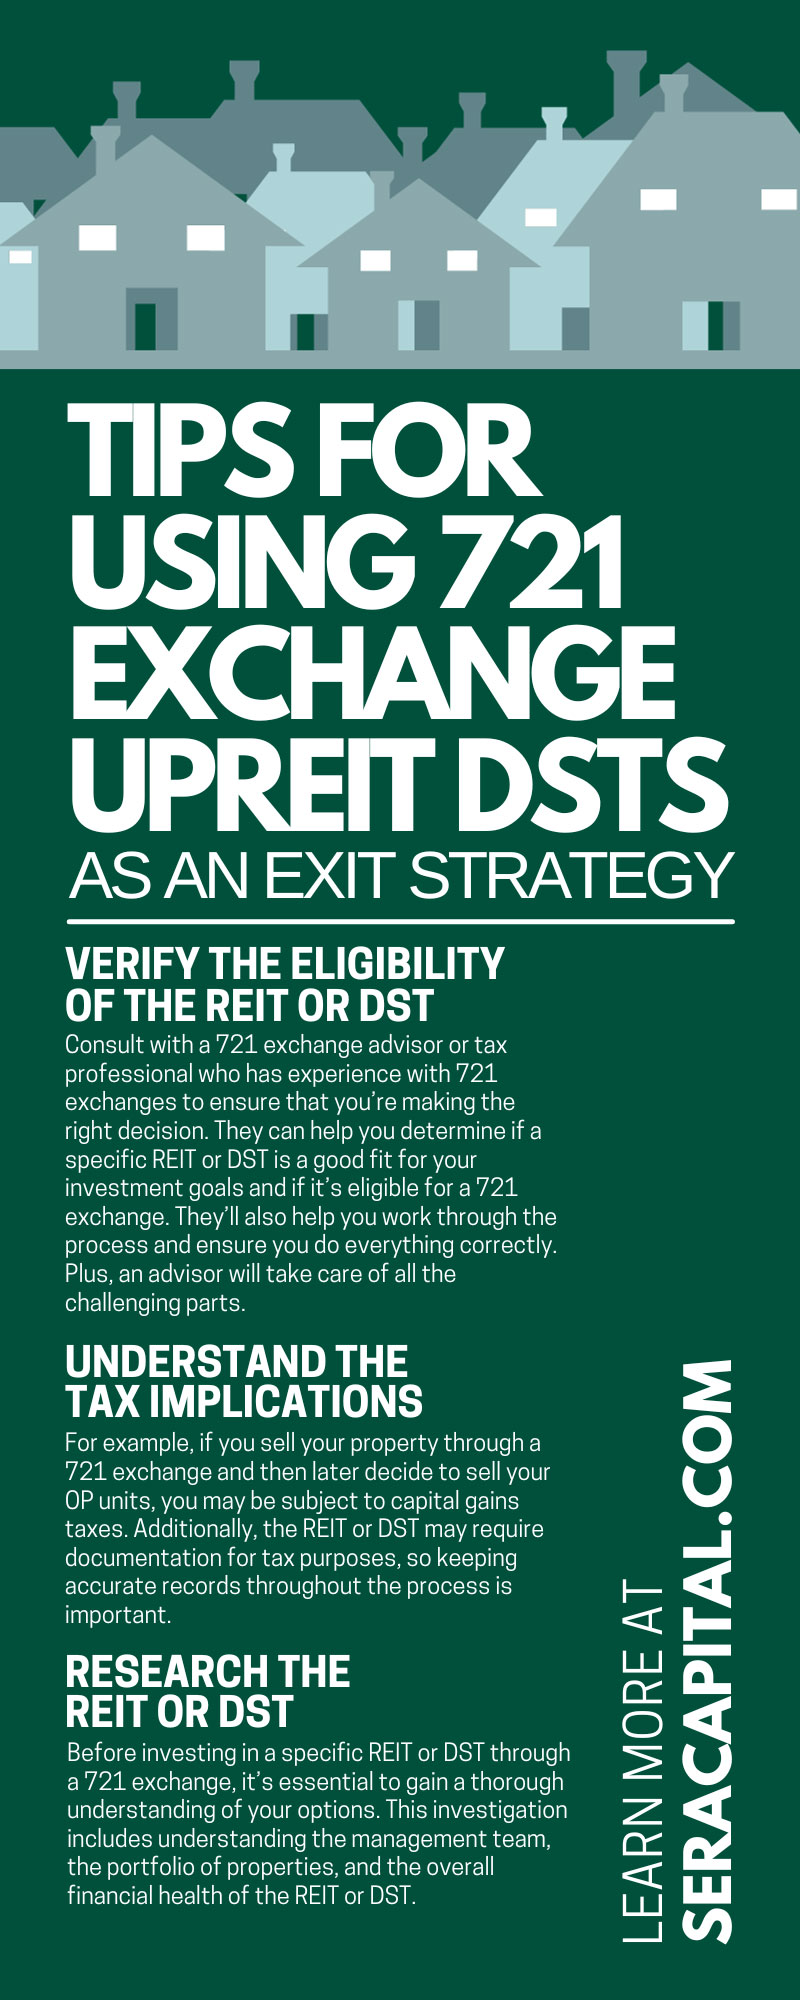 Tips for Using 721 Exchange UPREIT DSTs as an Exit Strategy 